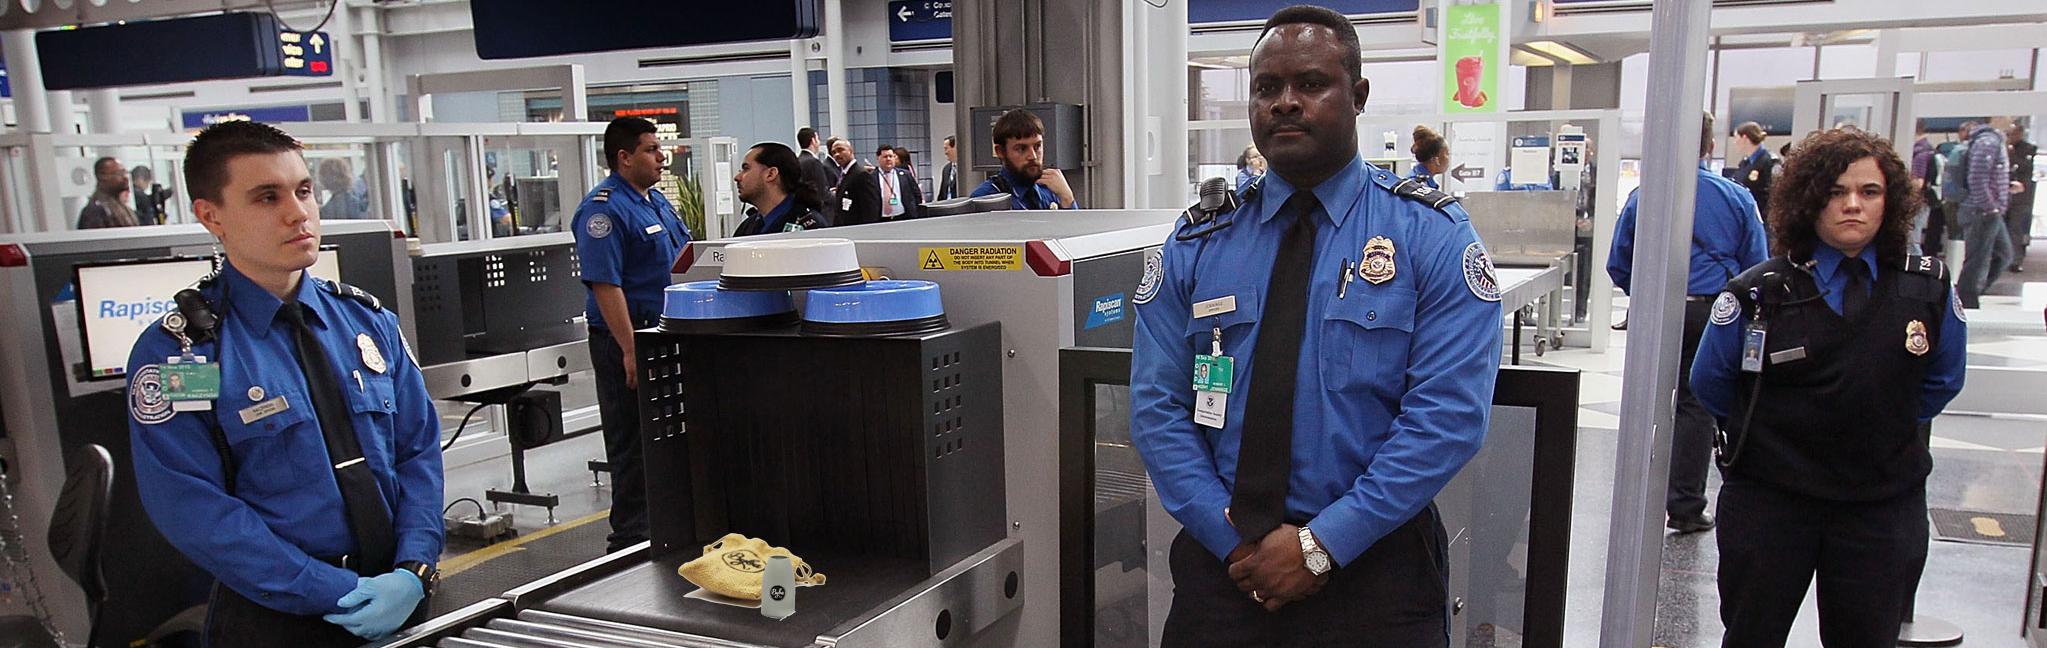 Airport Security Guards